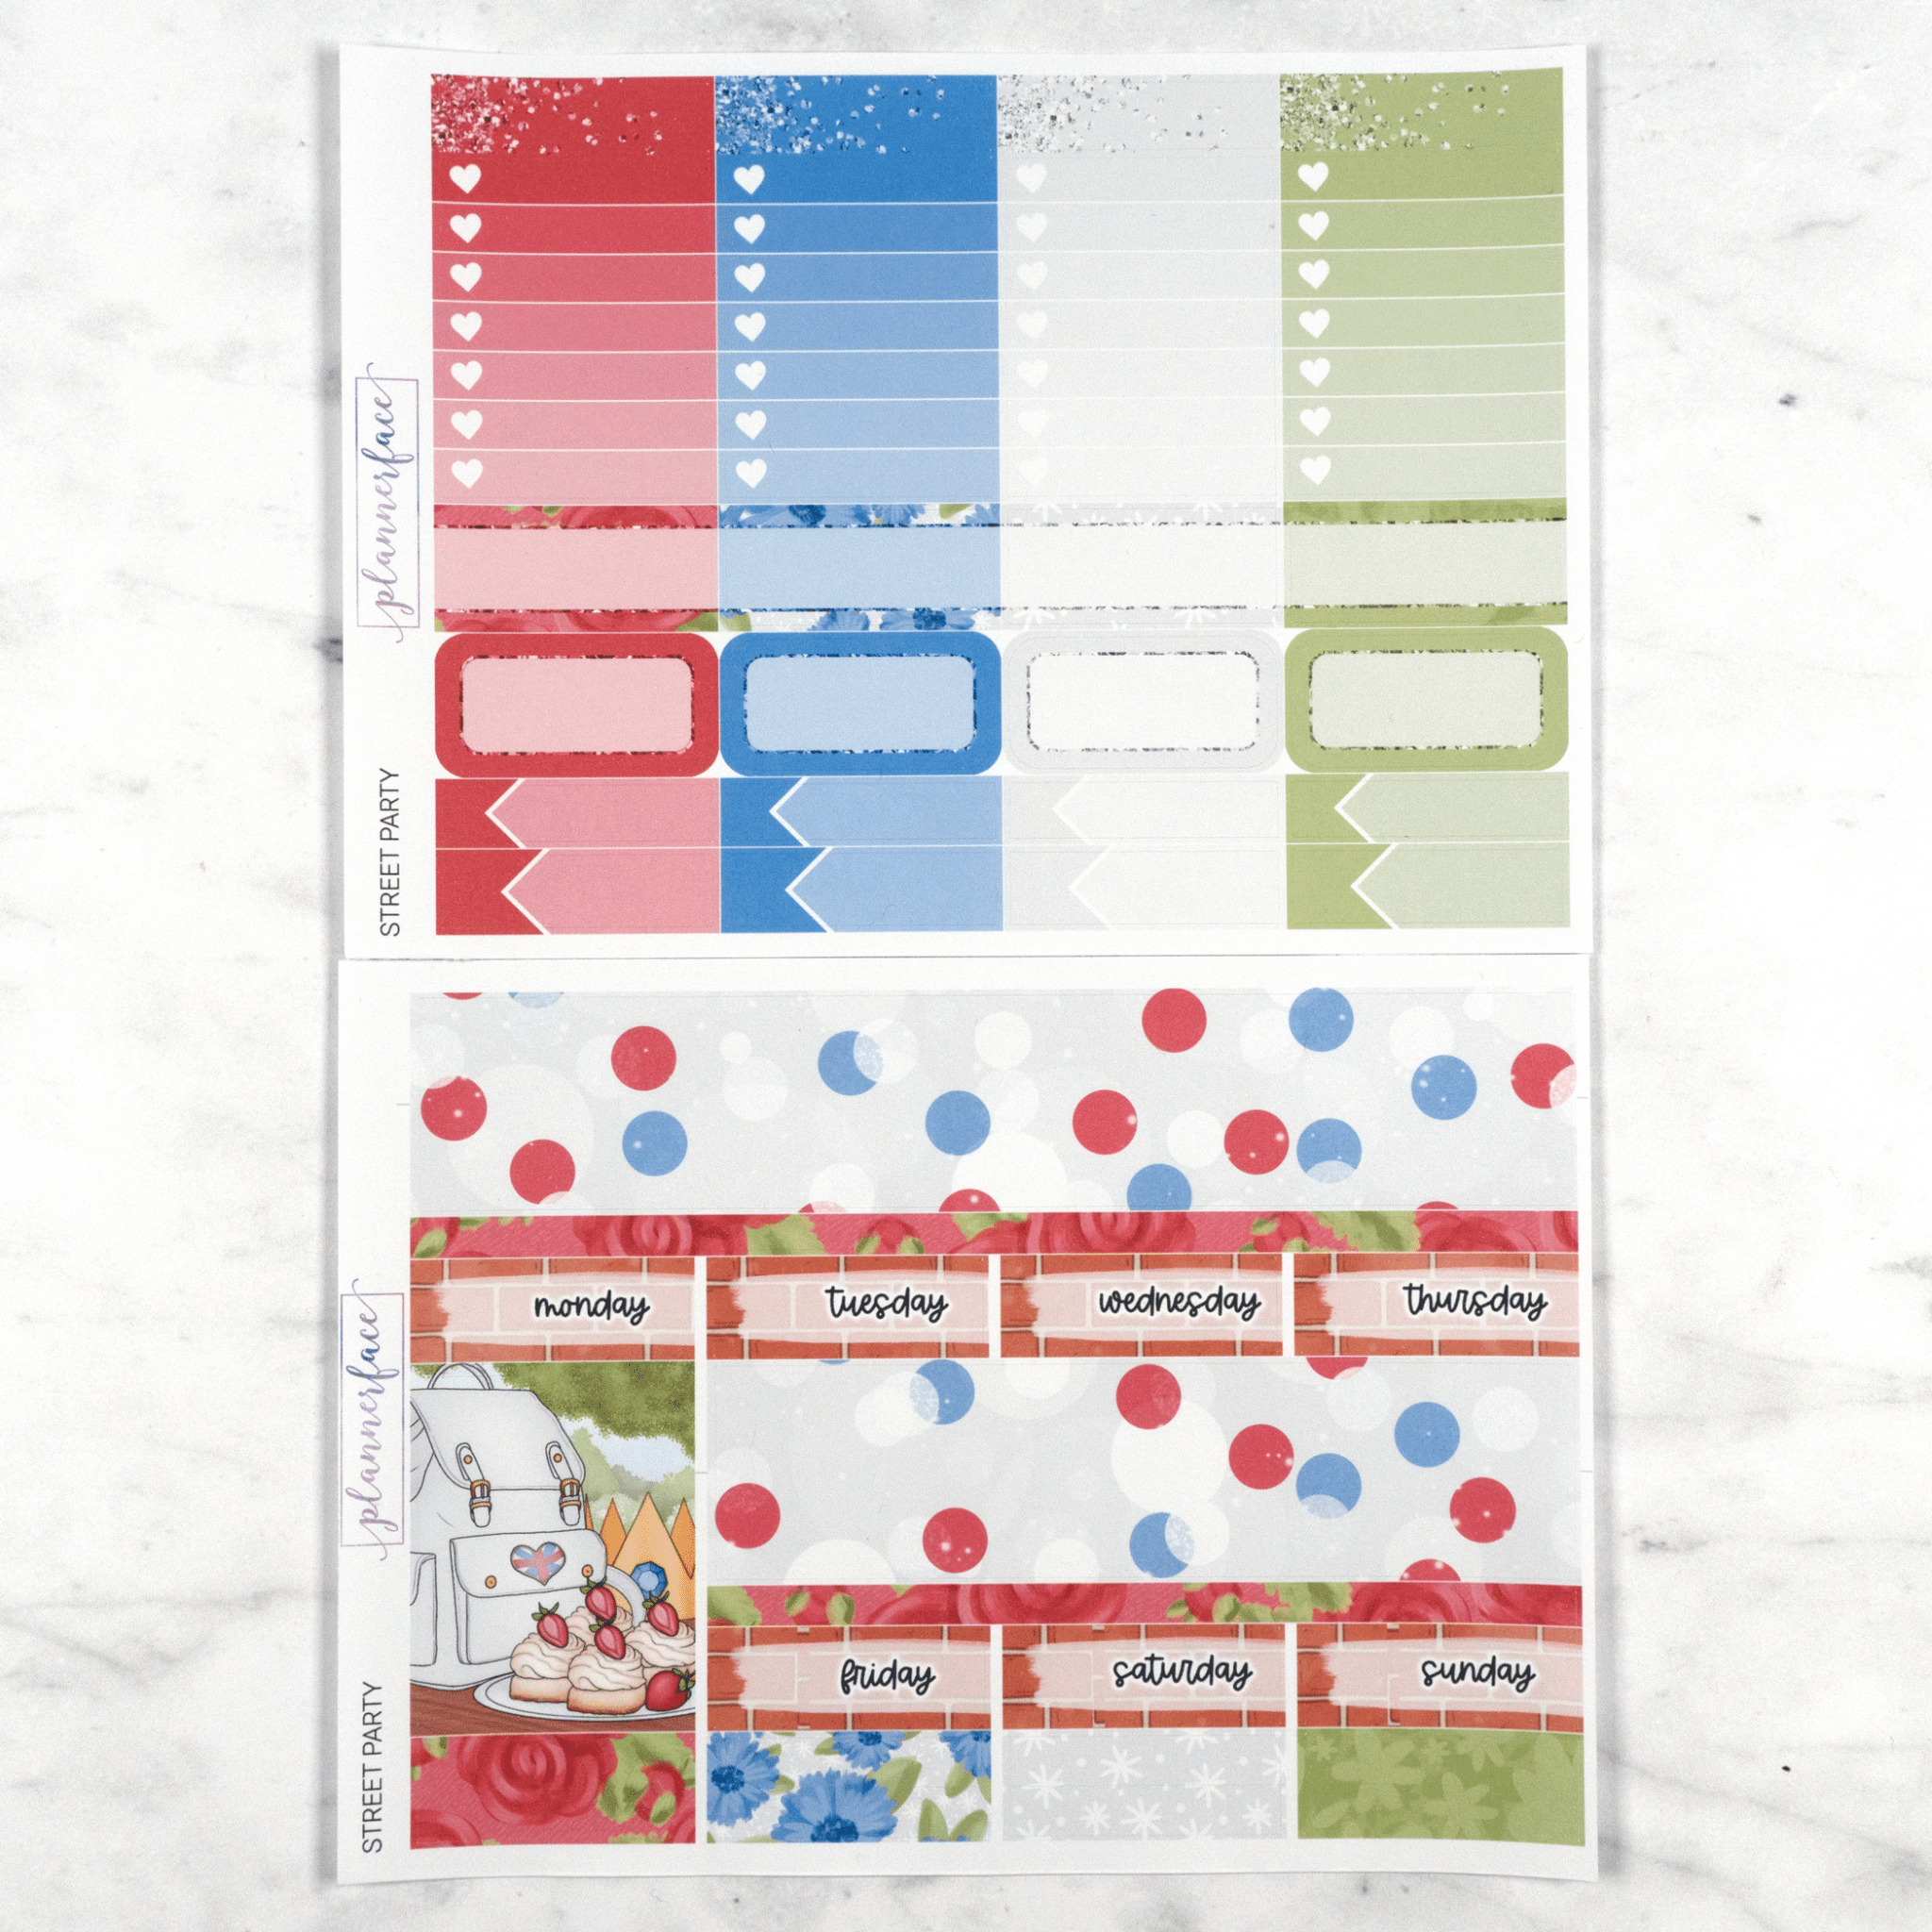 Street Party Weekly Kit by Plannerface